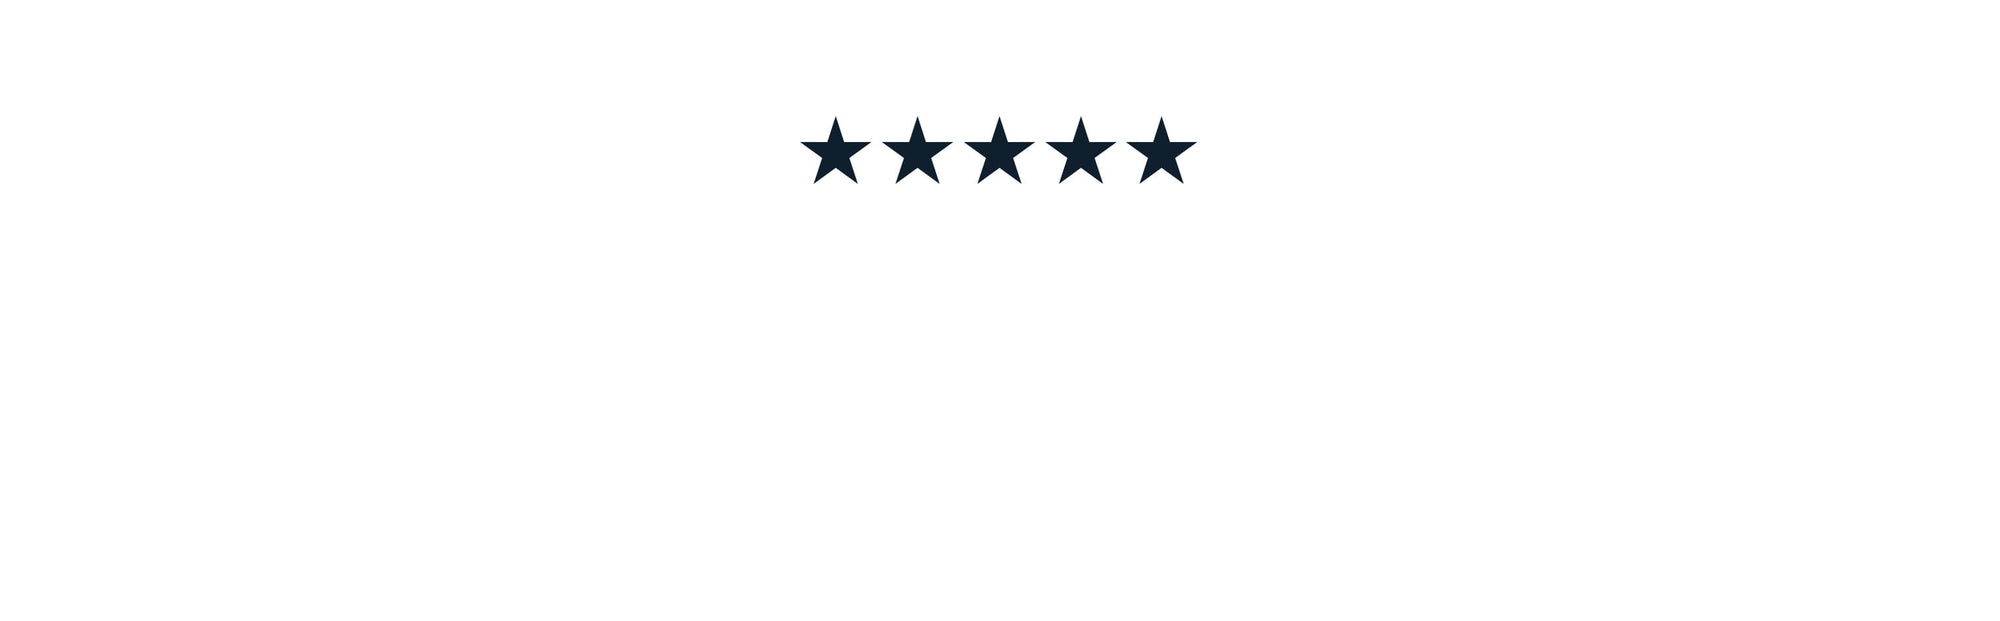 5 star review with text